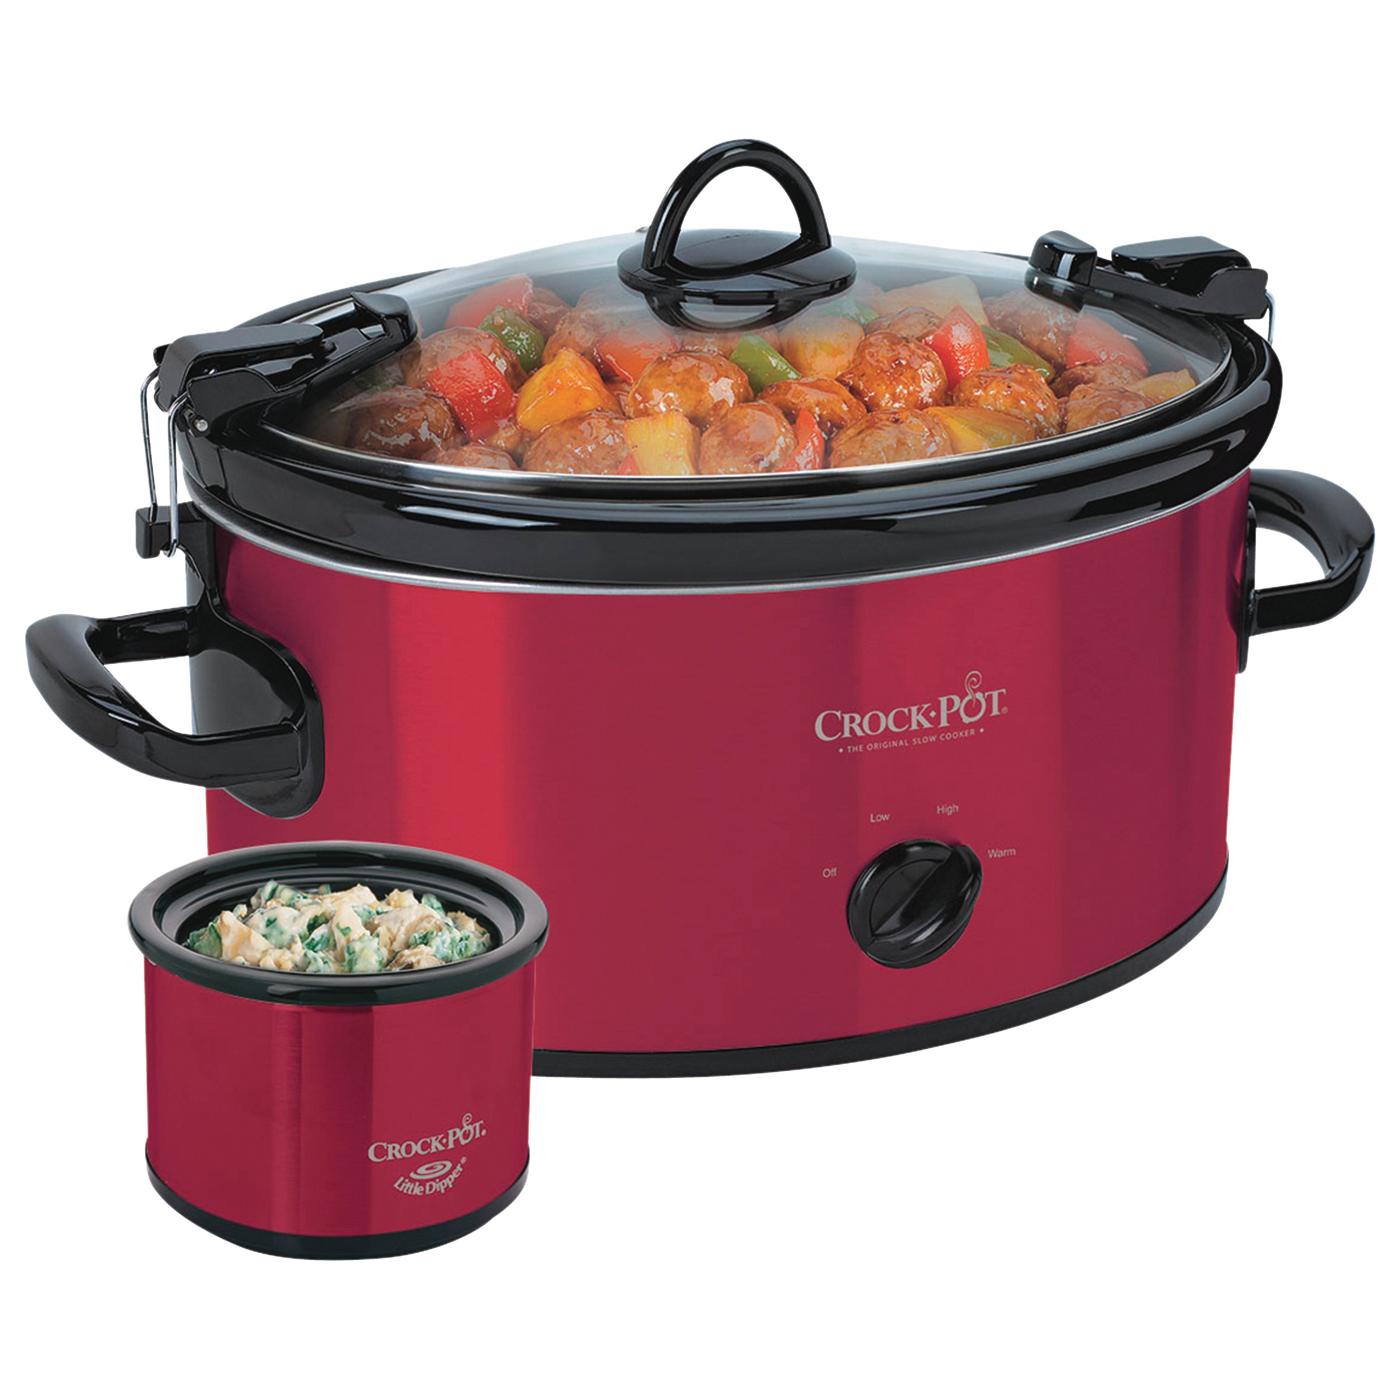 Meijer Hot Deals on Slow Cookers - Crock Pot Recipes, Slow Cooker Recipes,  Party Food, Cooking Guide & Essential Oils - Mummy deals